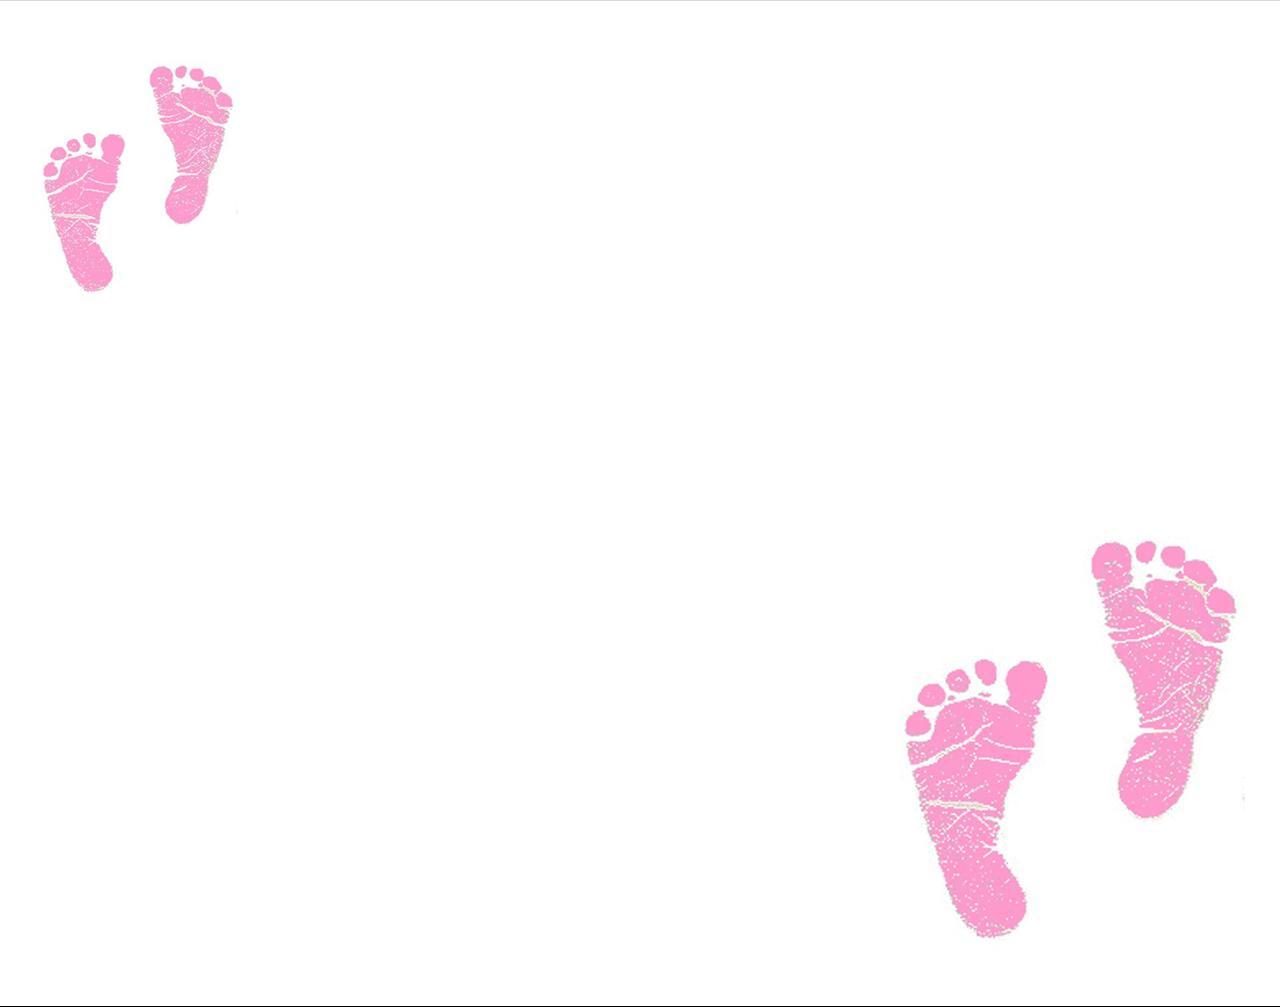 Baby Stroller Background for Powerpoint Presentations, Baby